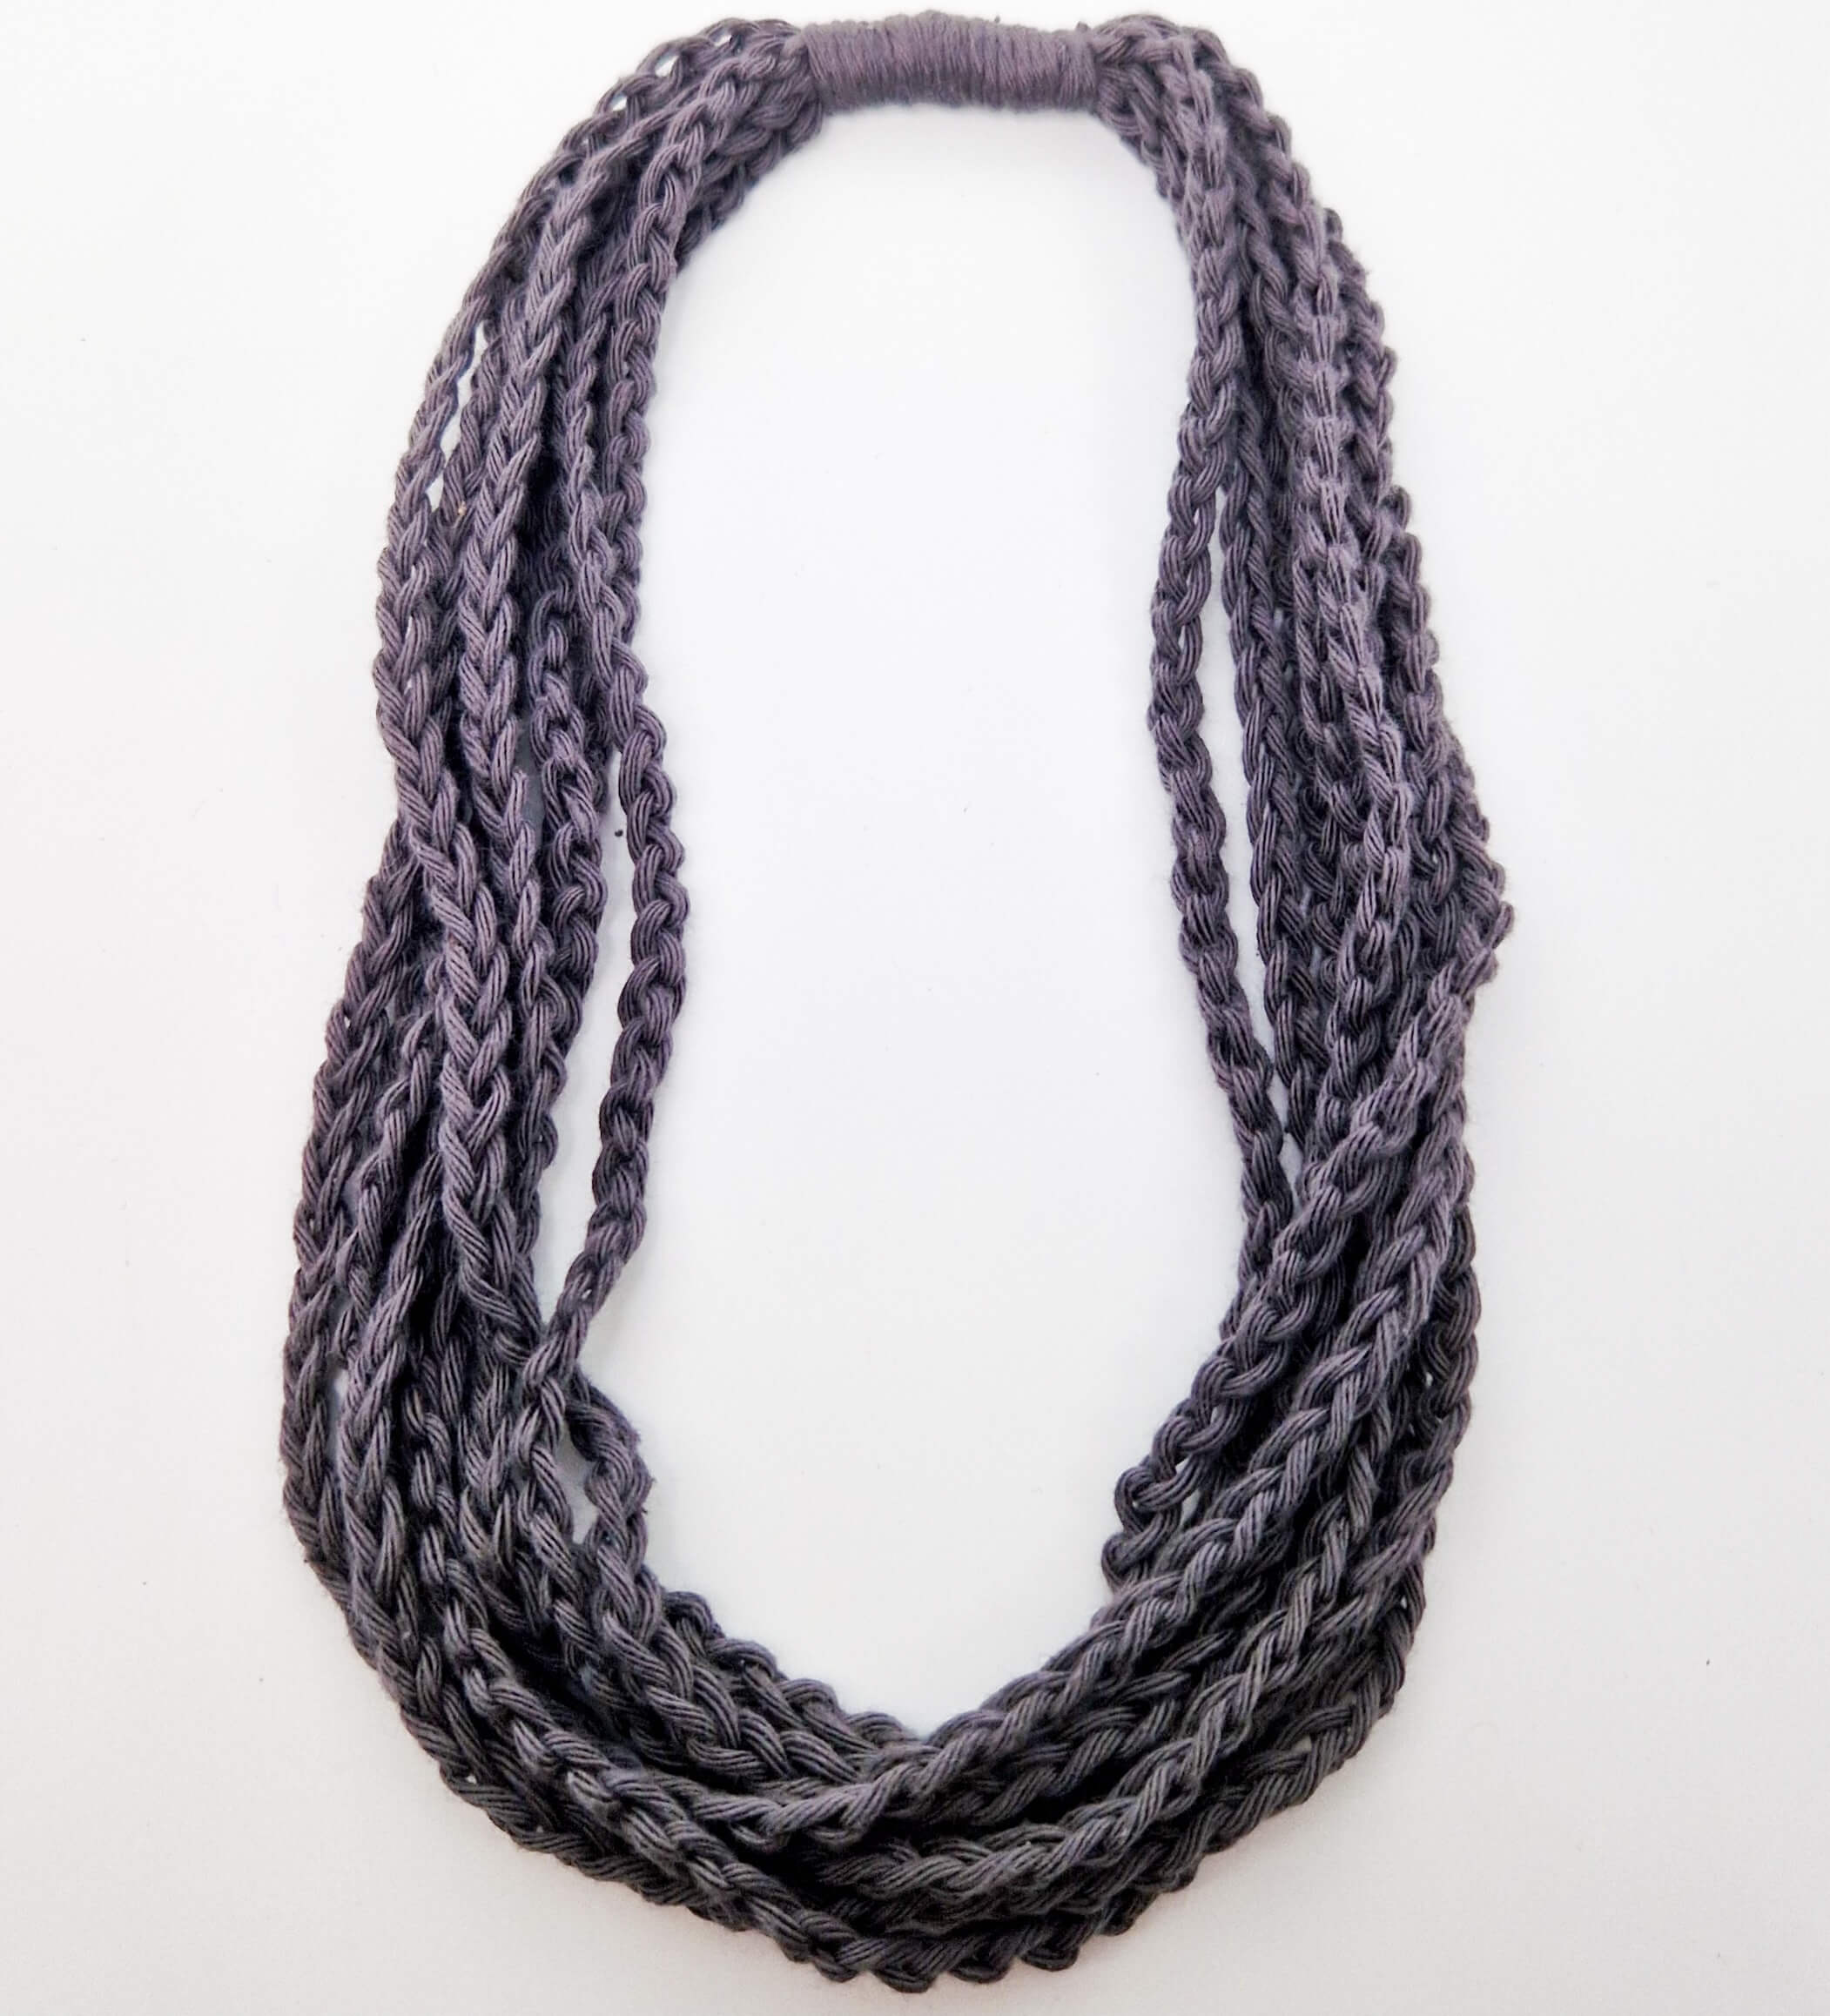 How to Crochet a Chain Stitch Necklace